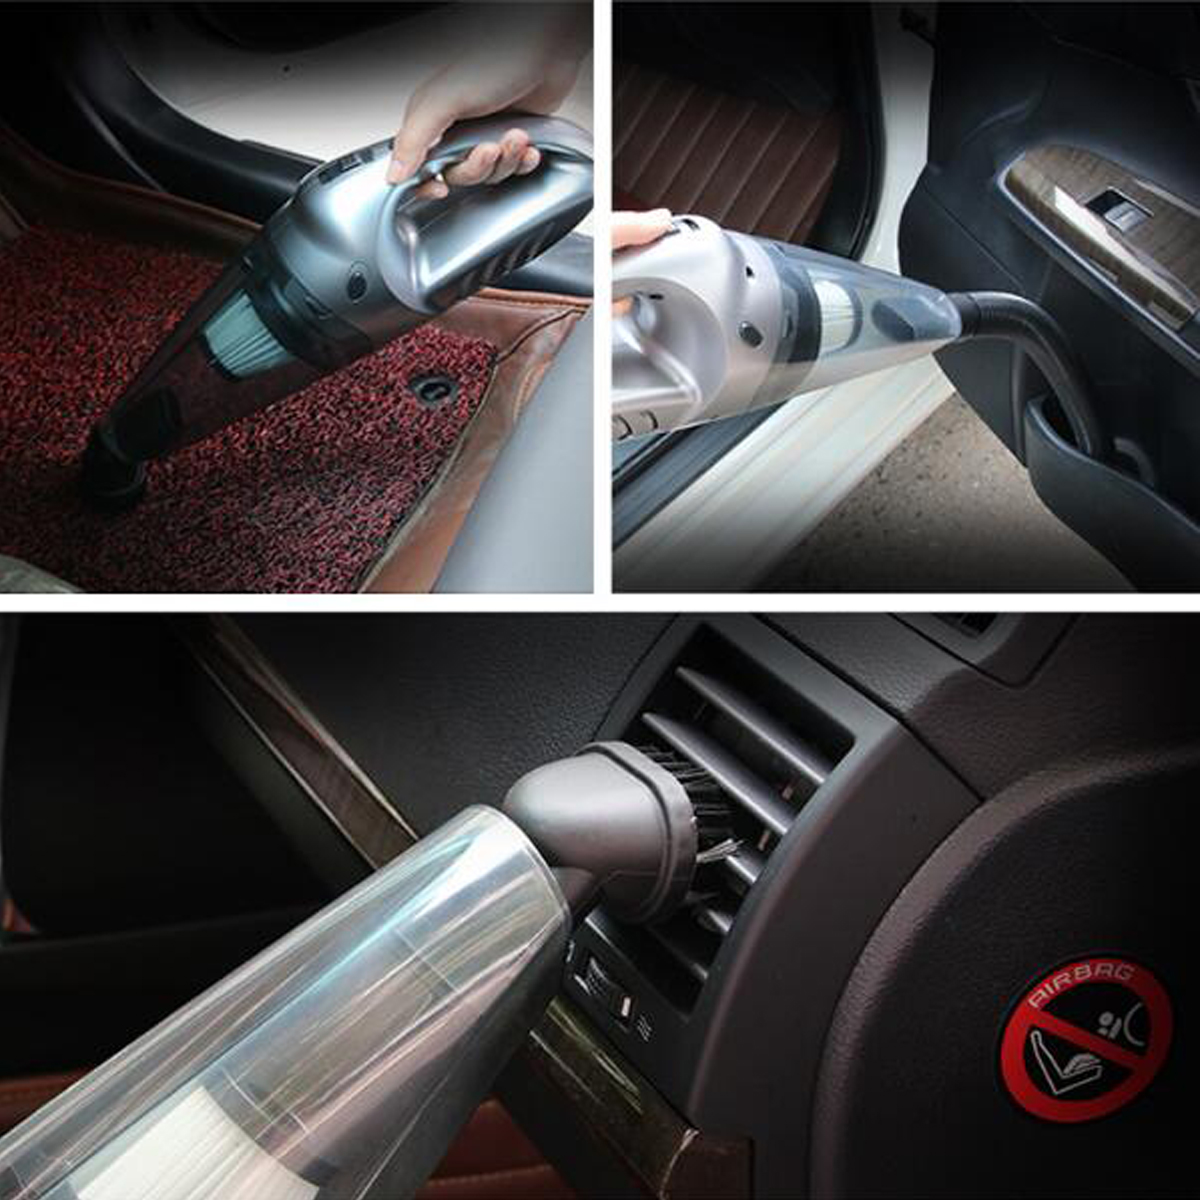 120W-Portable-Auto-Car-Handheld-Vacuum-Cleaner-Duster-Wet--Dry-Dirt-Suction-with-LED-Light-1624459-1